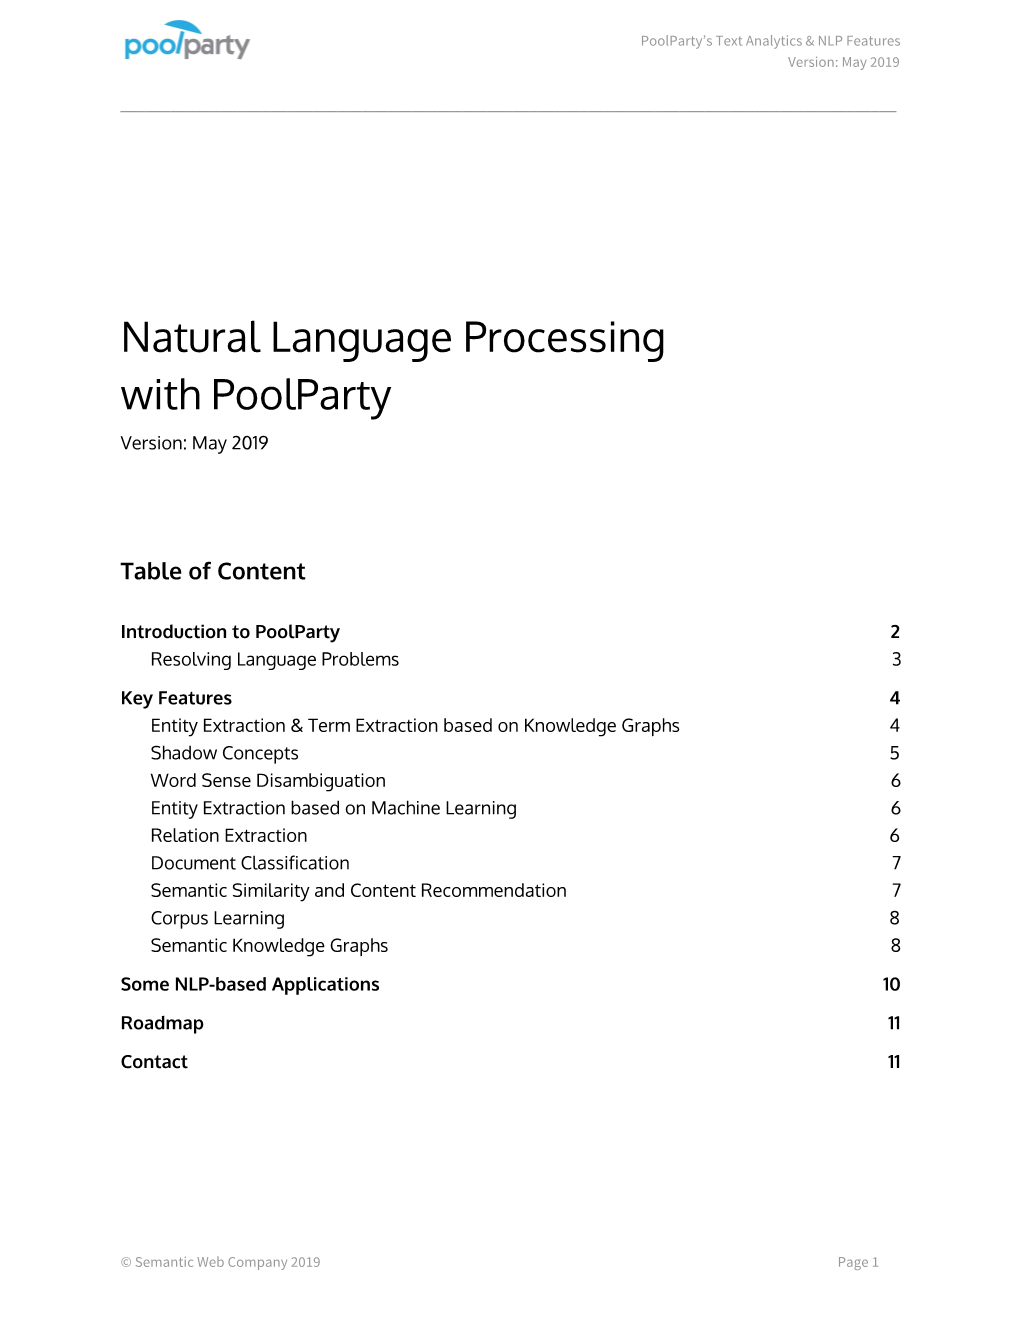 Natural Language Processing with Poolparty Version: May 2019